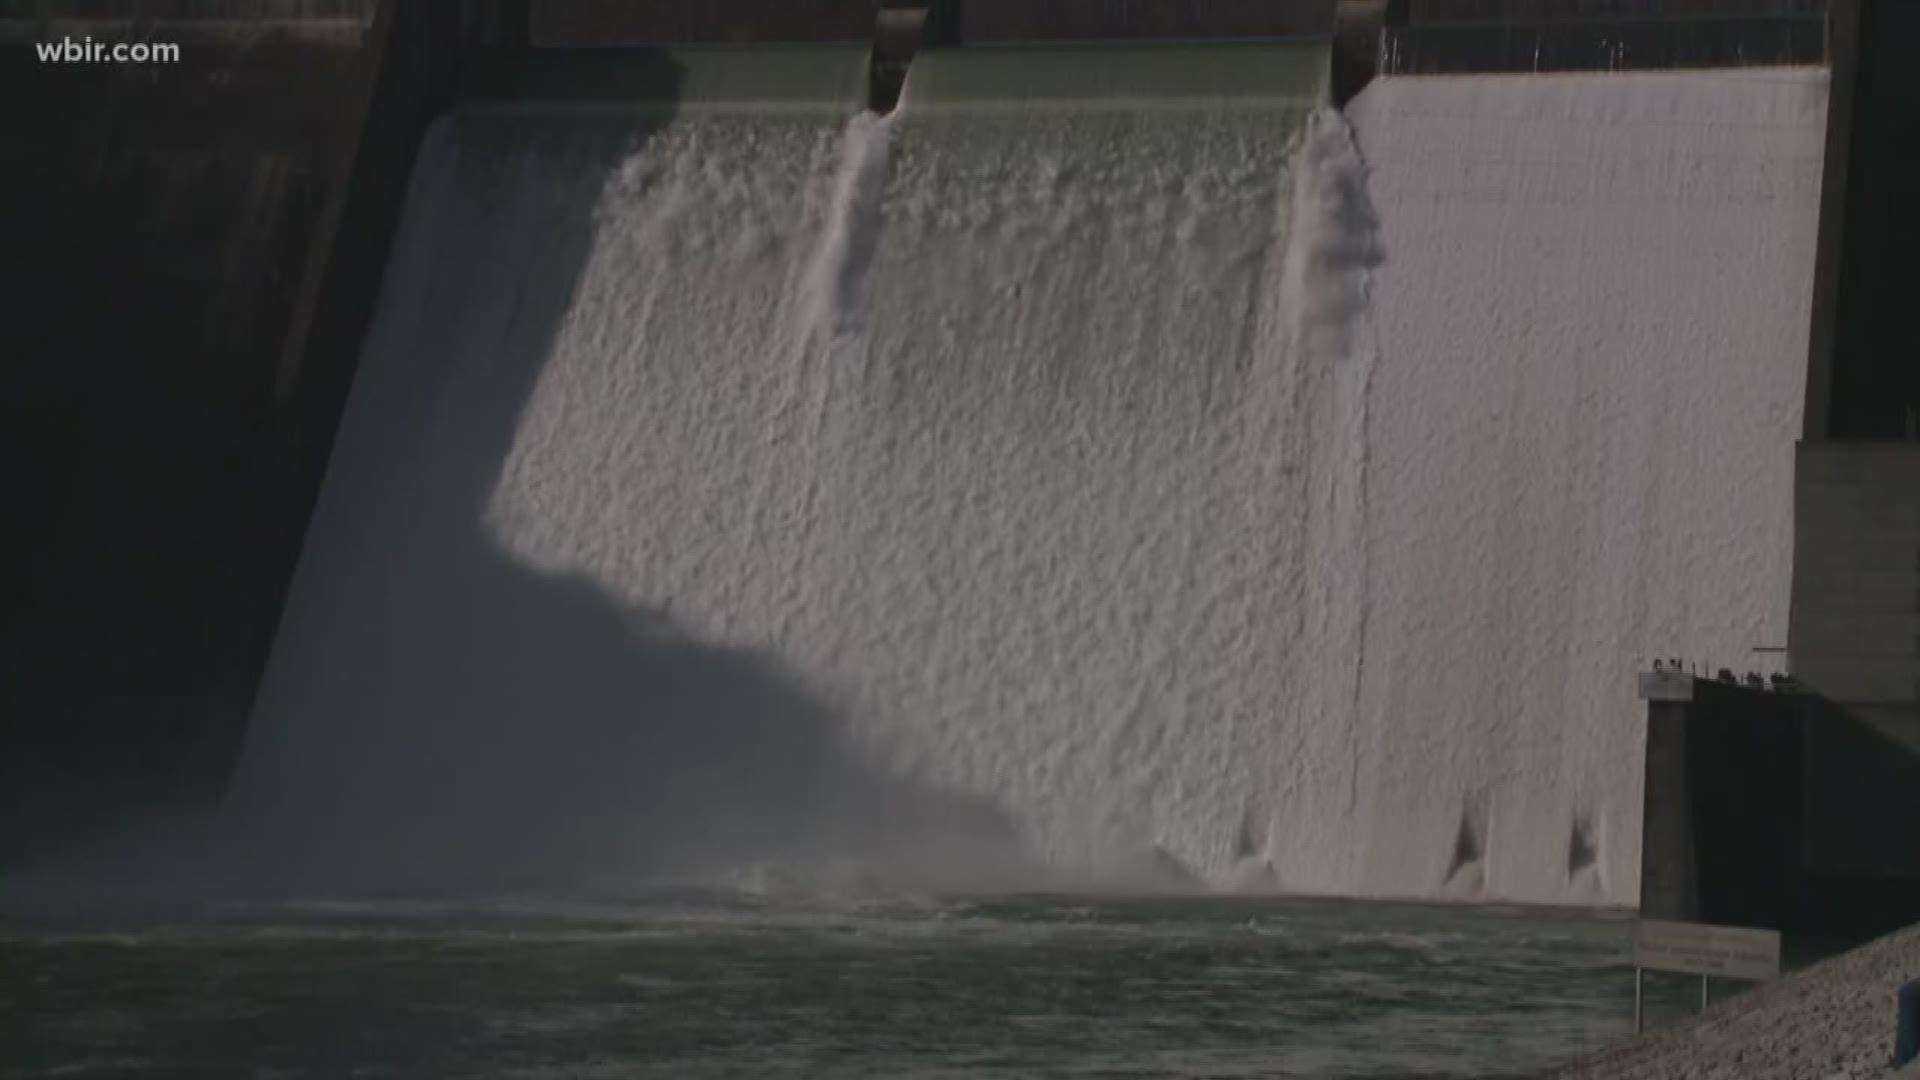 A rare sight appeared Monday - Norris Dam spilling water out of its spillway gates.